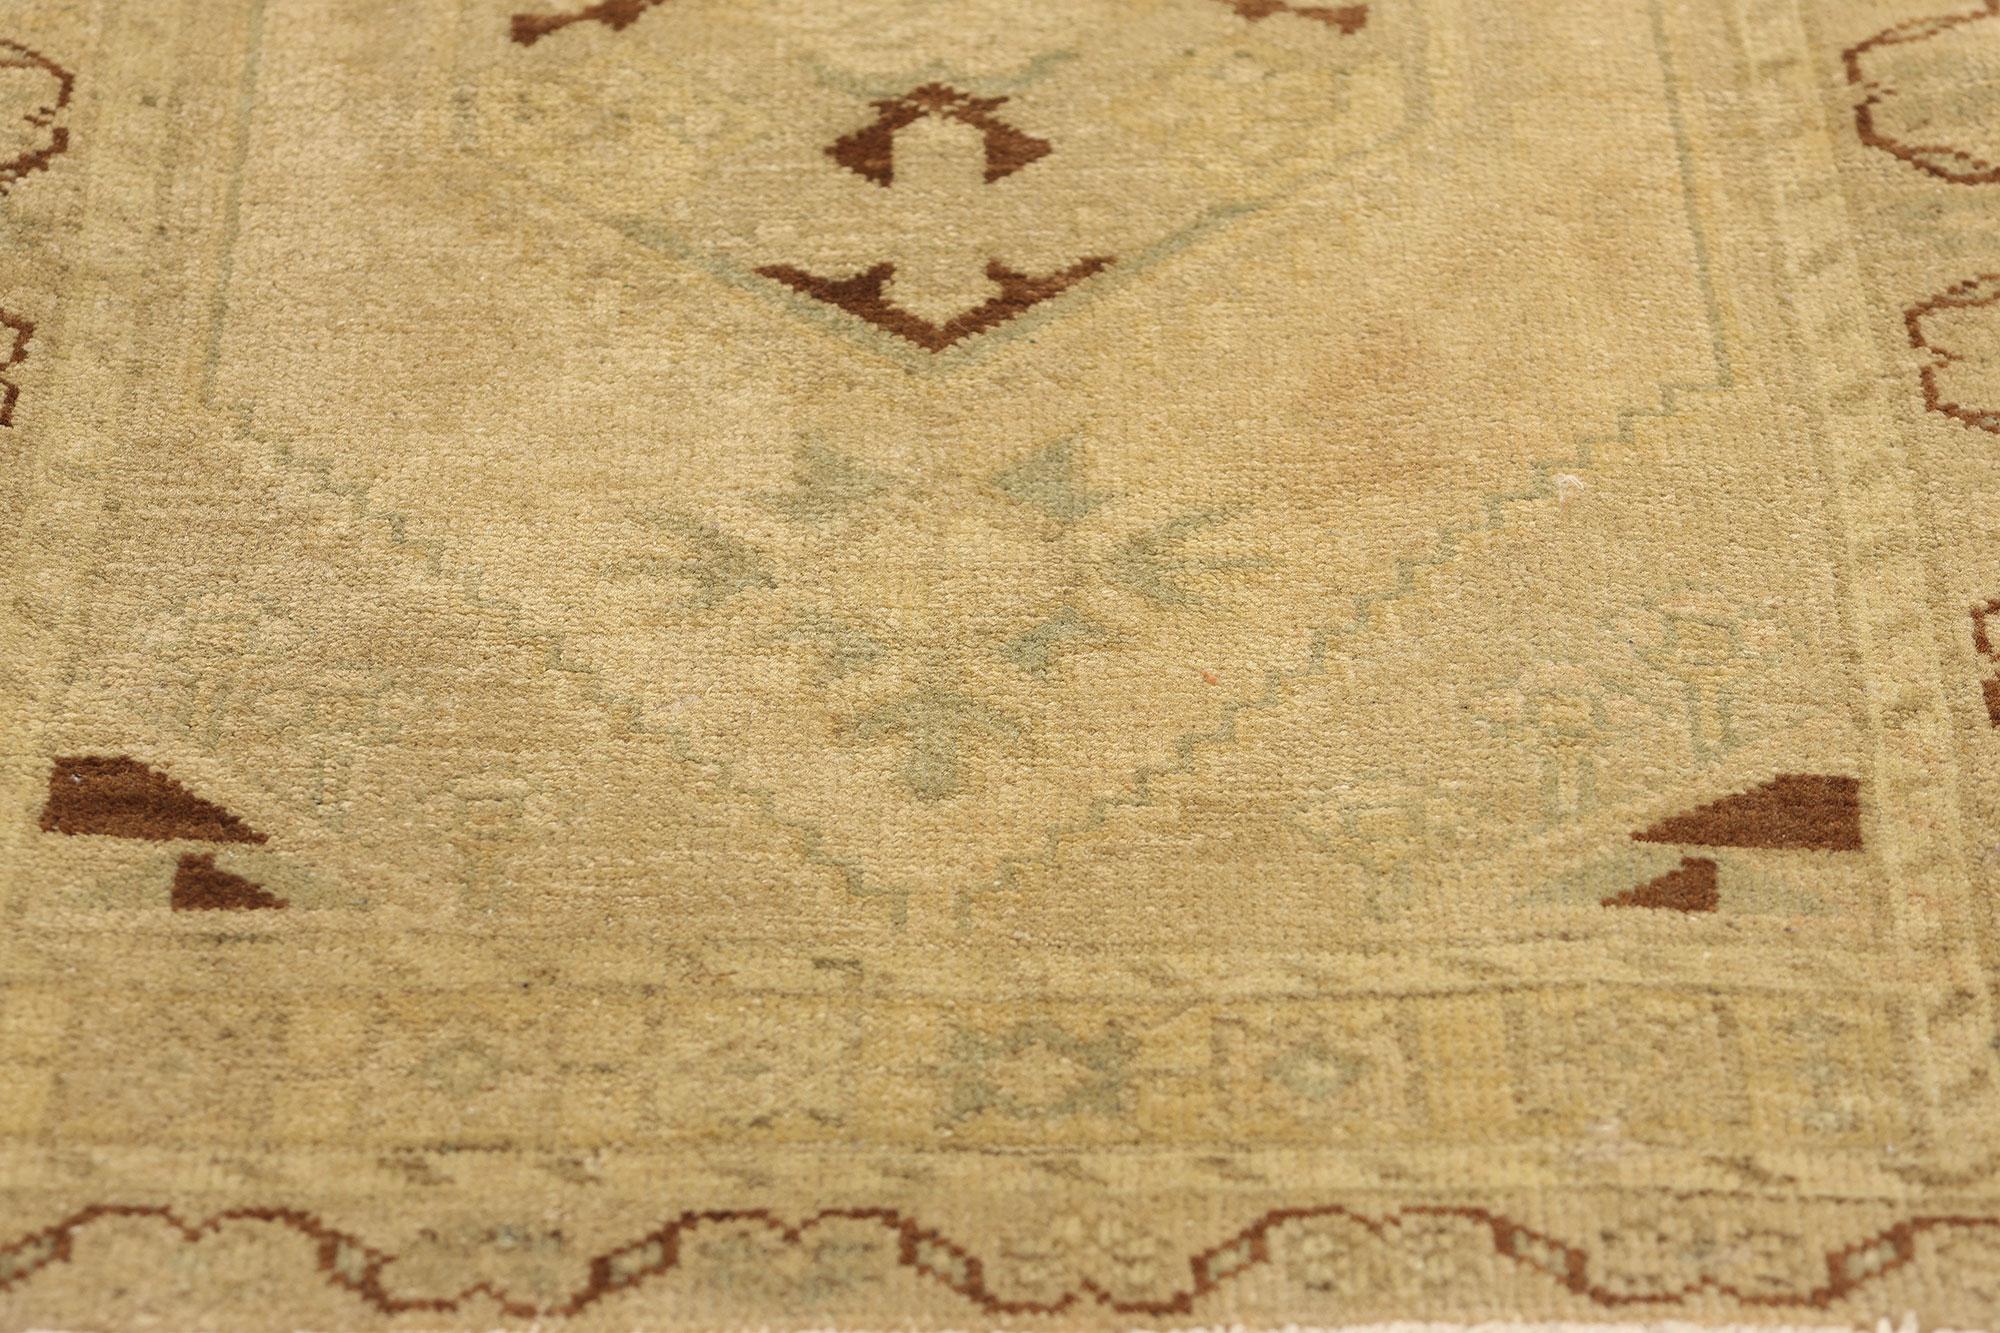 Vintage Turkish Yastik Rug, Biophilic Design Meets Earth-Tone Elegance In Good Condition For Sale In Dallas, TX